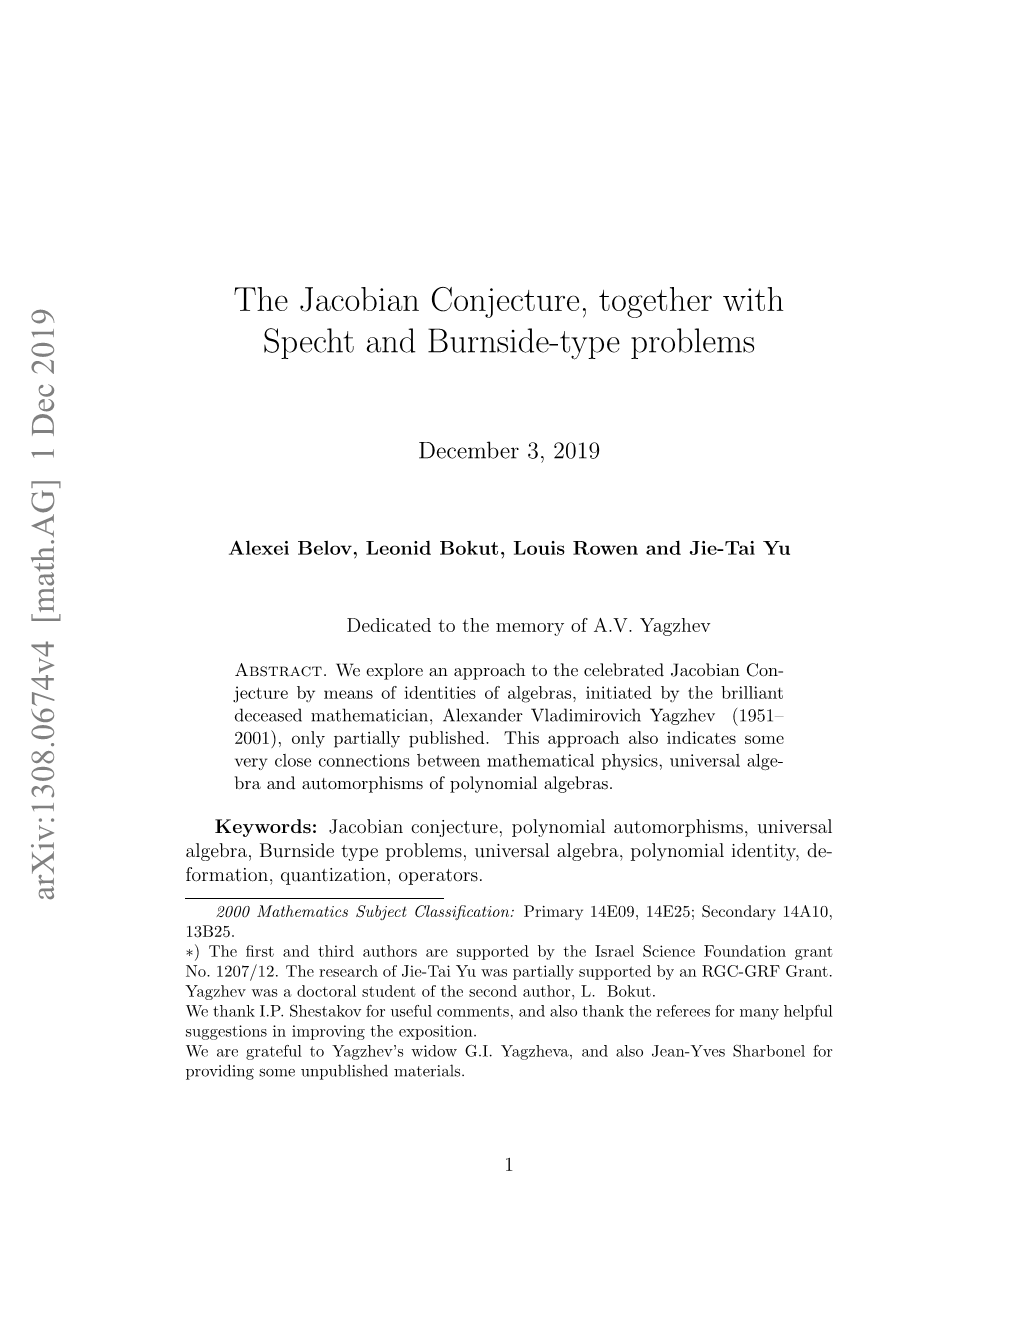 The Jacobian Conjecture, Together with Specht and Burnside-Type